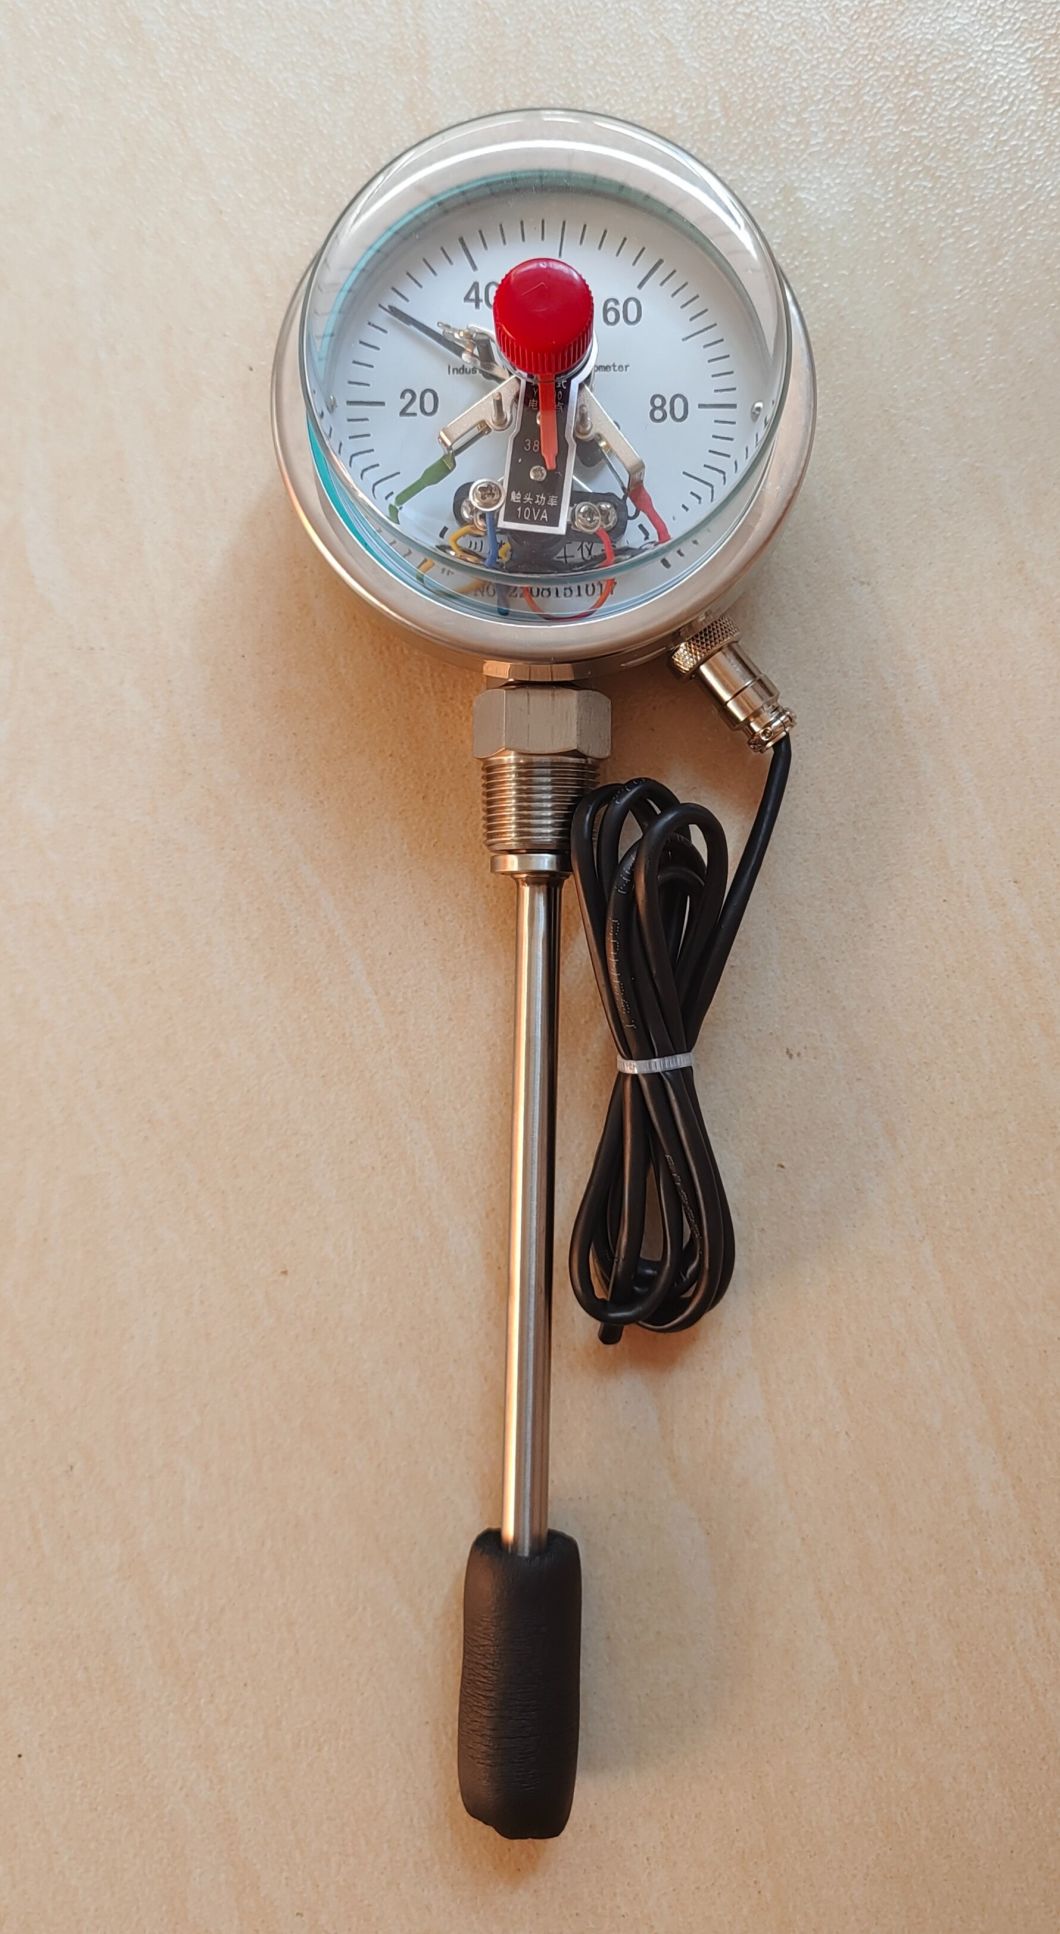 Wss-411 Radial Thermometer Bimetal Thermometer